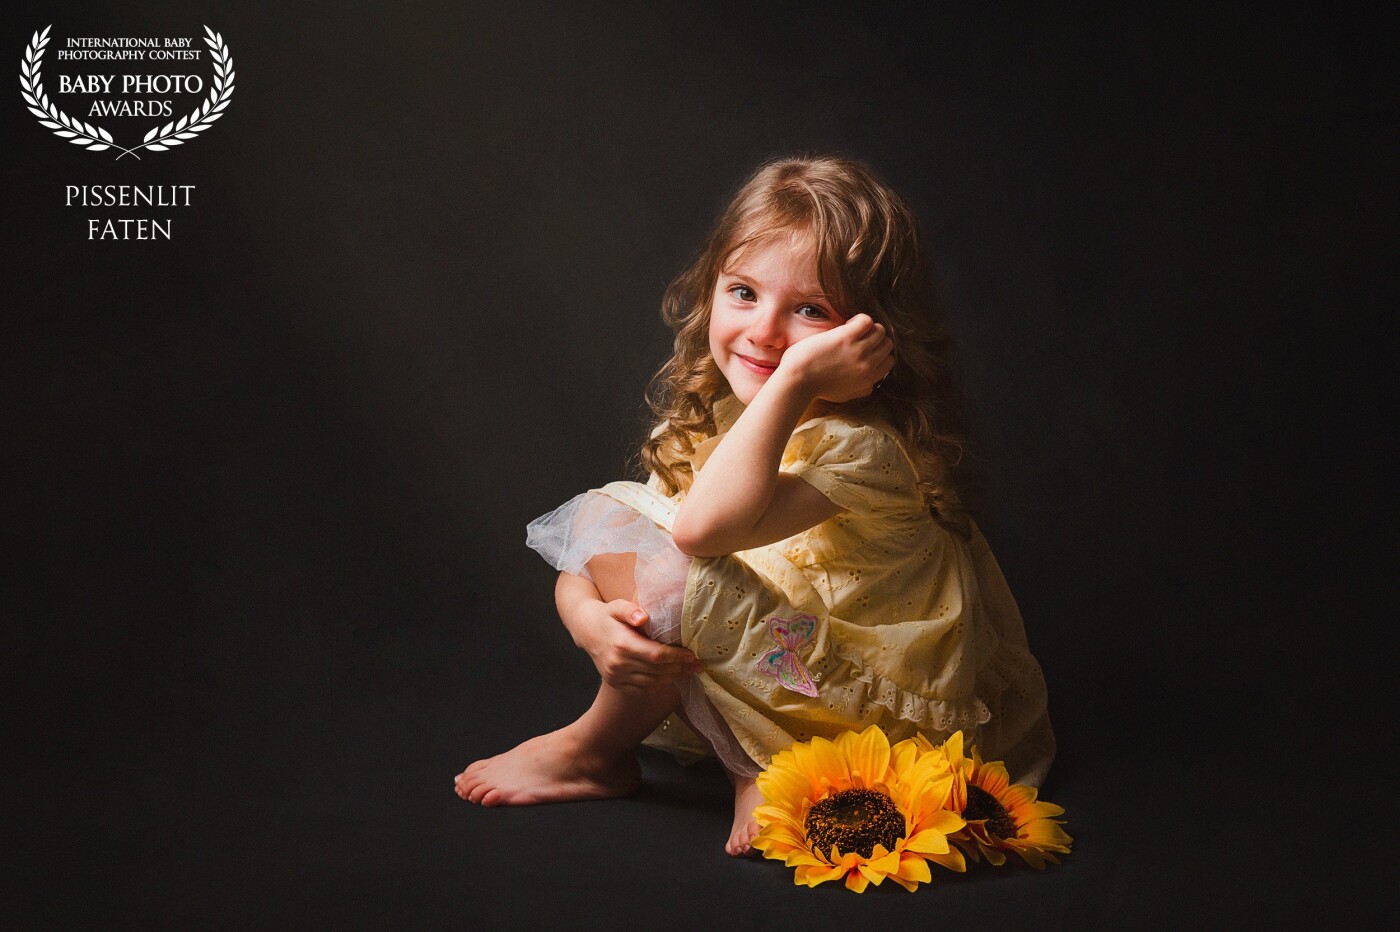 Her name is Lina, she is 4 years old, a little flower that I have done several shoots for her since she was newborn, she has become part of my photographer's story, the mood of this photo was spontaneous, romantic, dreamy and translated the emotions that I like to share through my photos.